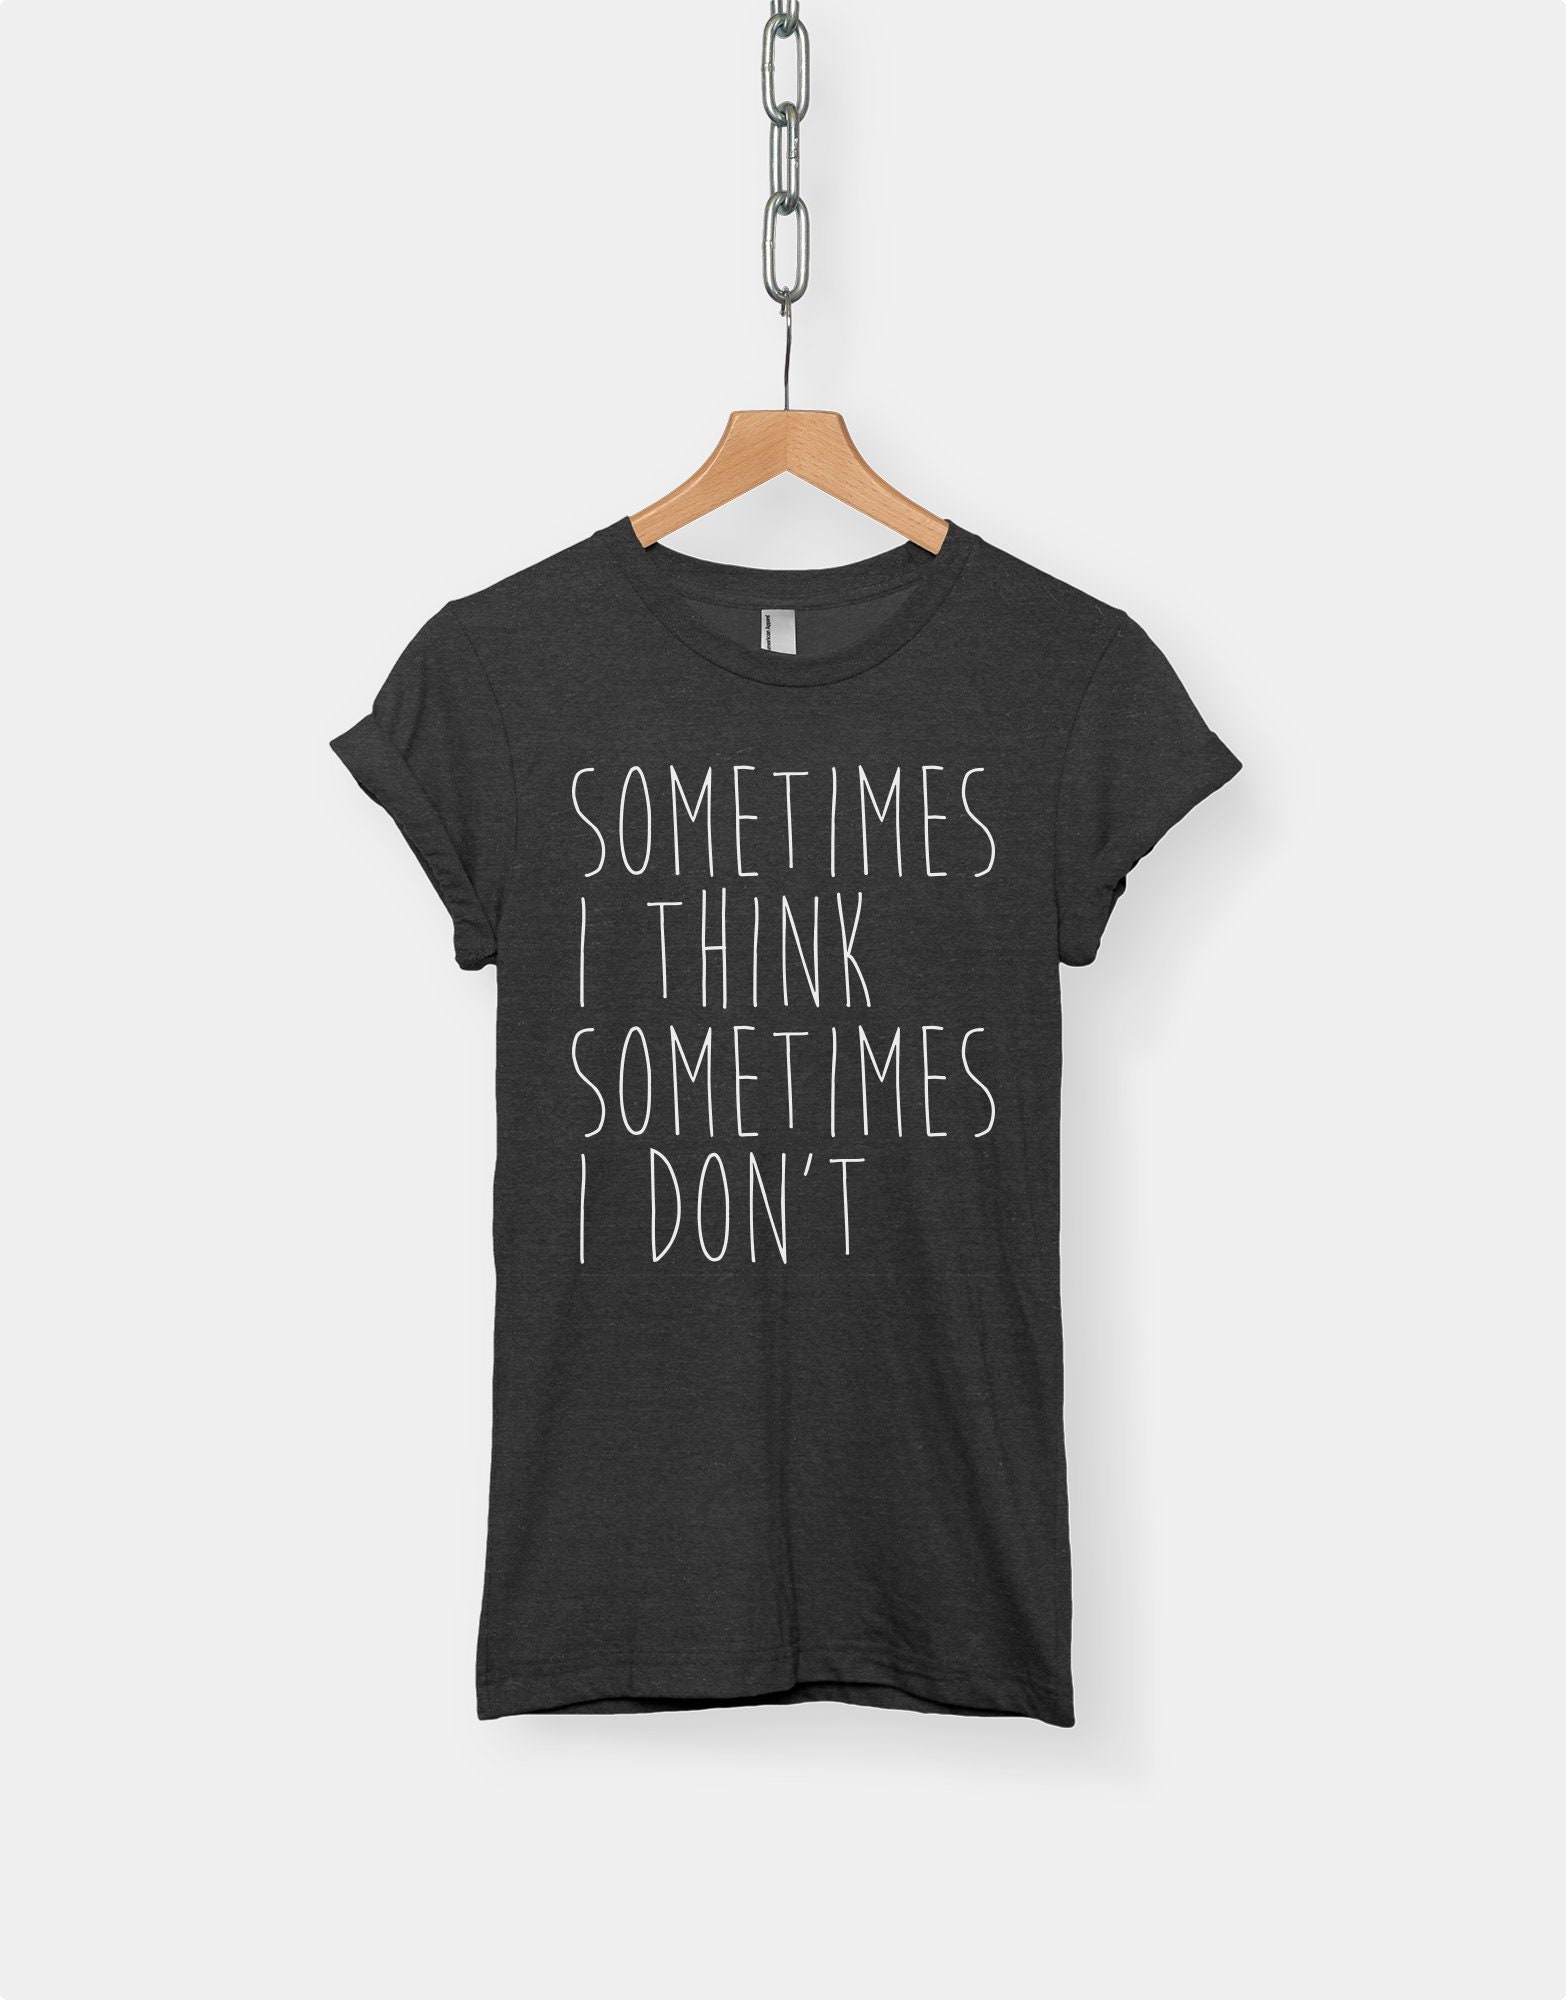 Sometimes I Think Sometimes I Don't t-shirt tee // hipster | Etsy